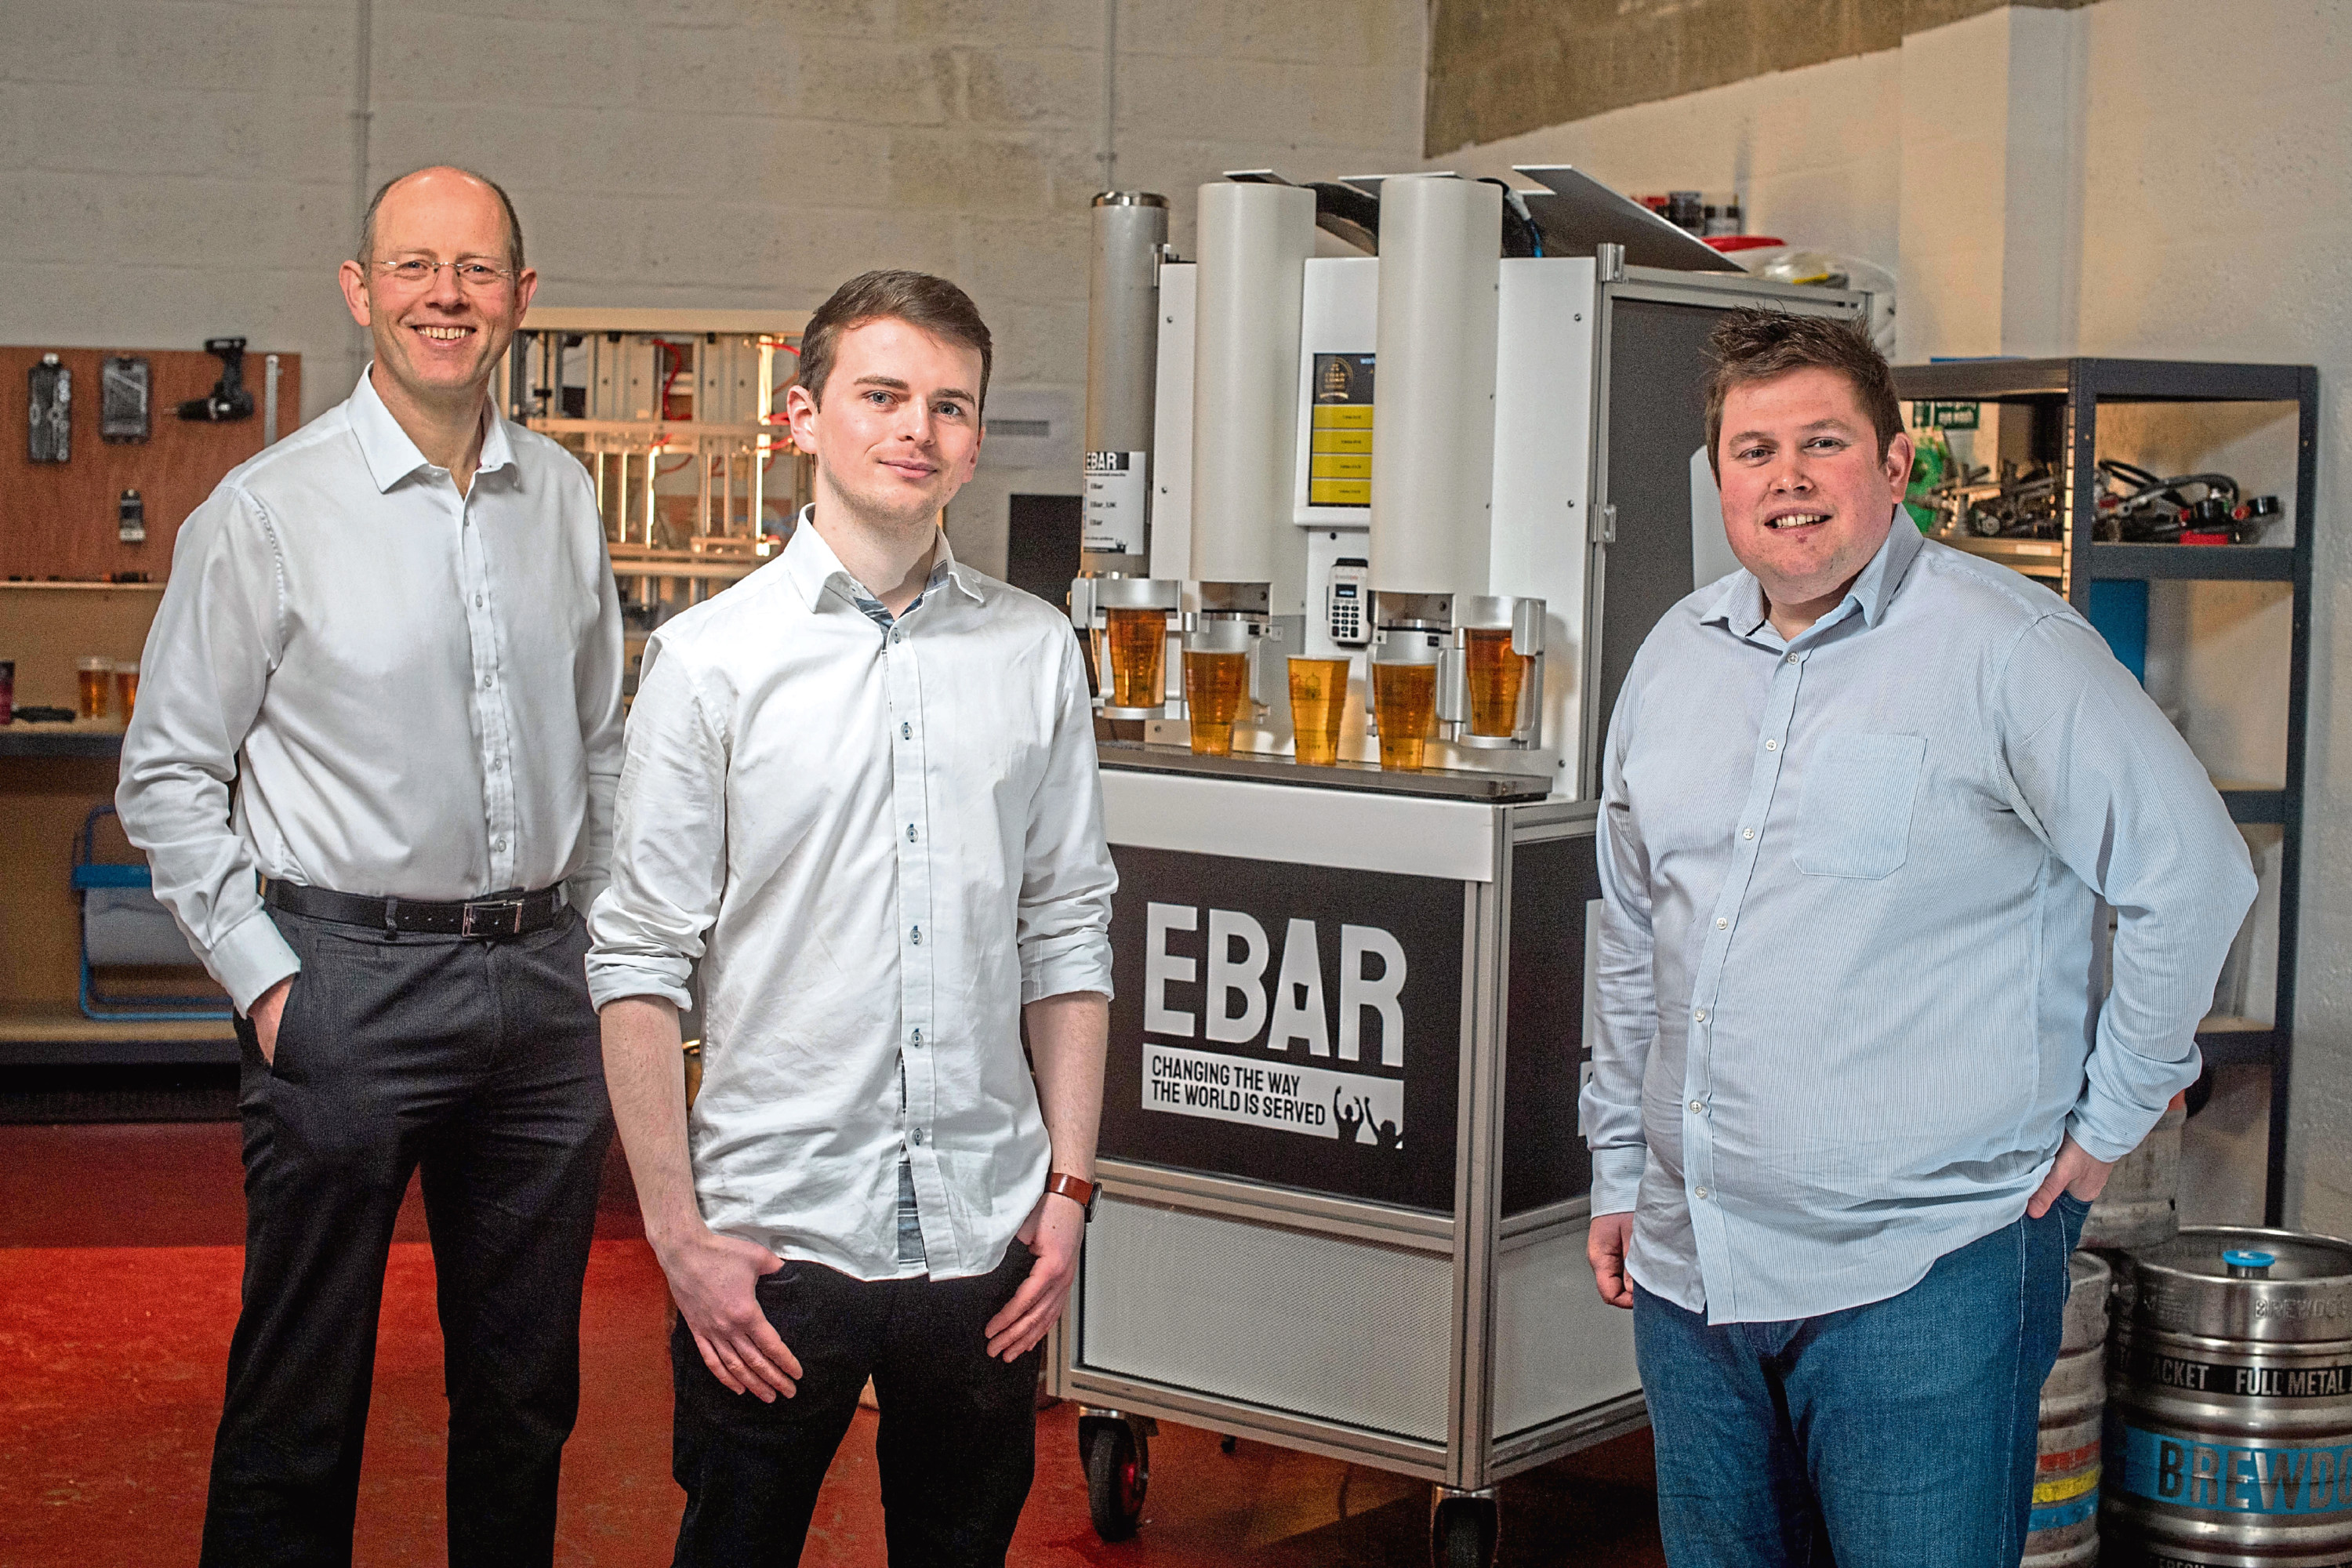 l-r EBar Initiatives director Nick Beeson, product development engineer Kyle O'Callaghan and managing director Sam Pettipher